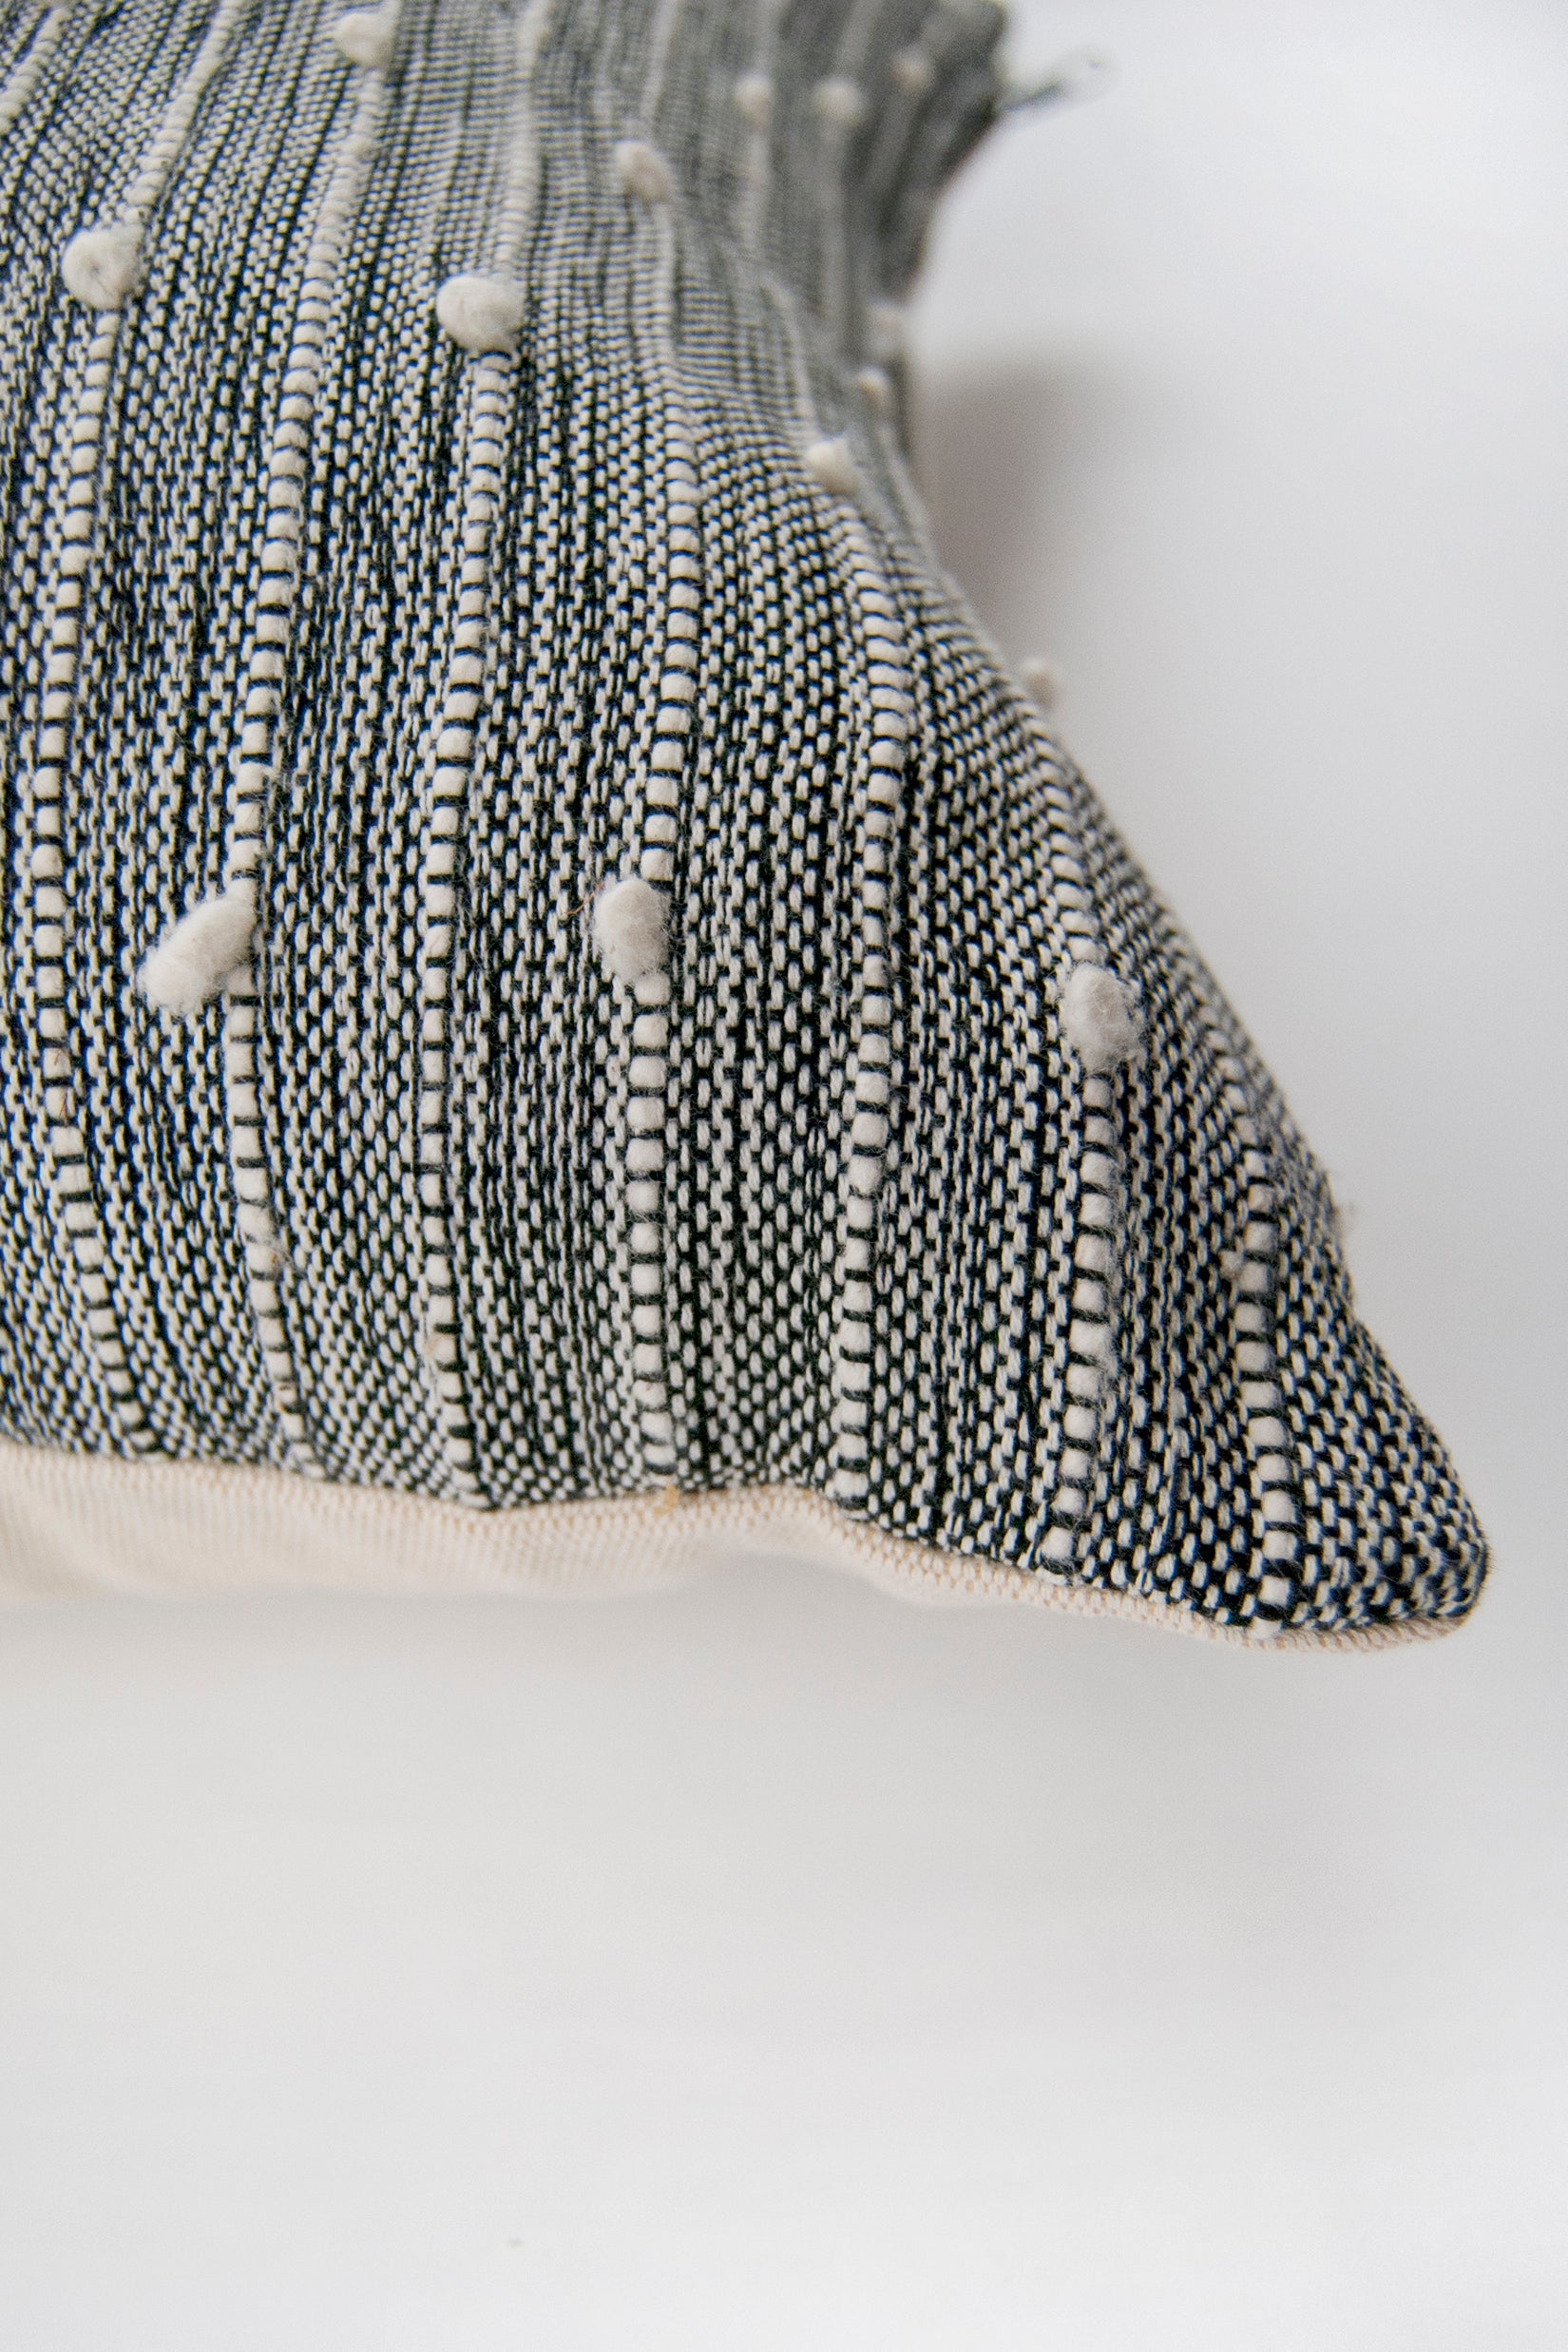 Corner detail of black and white woven throw pillow with small white pom pom accents